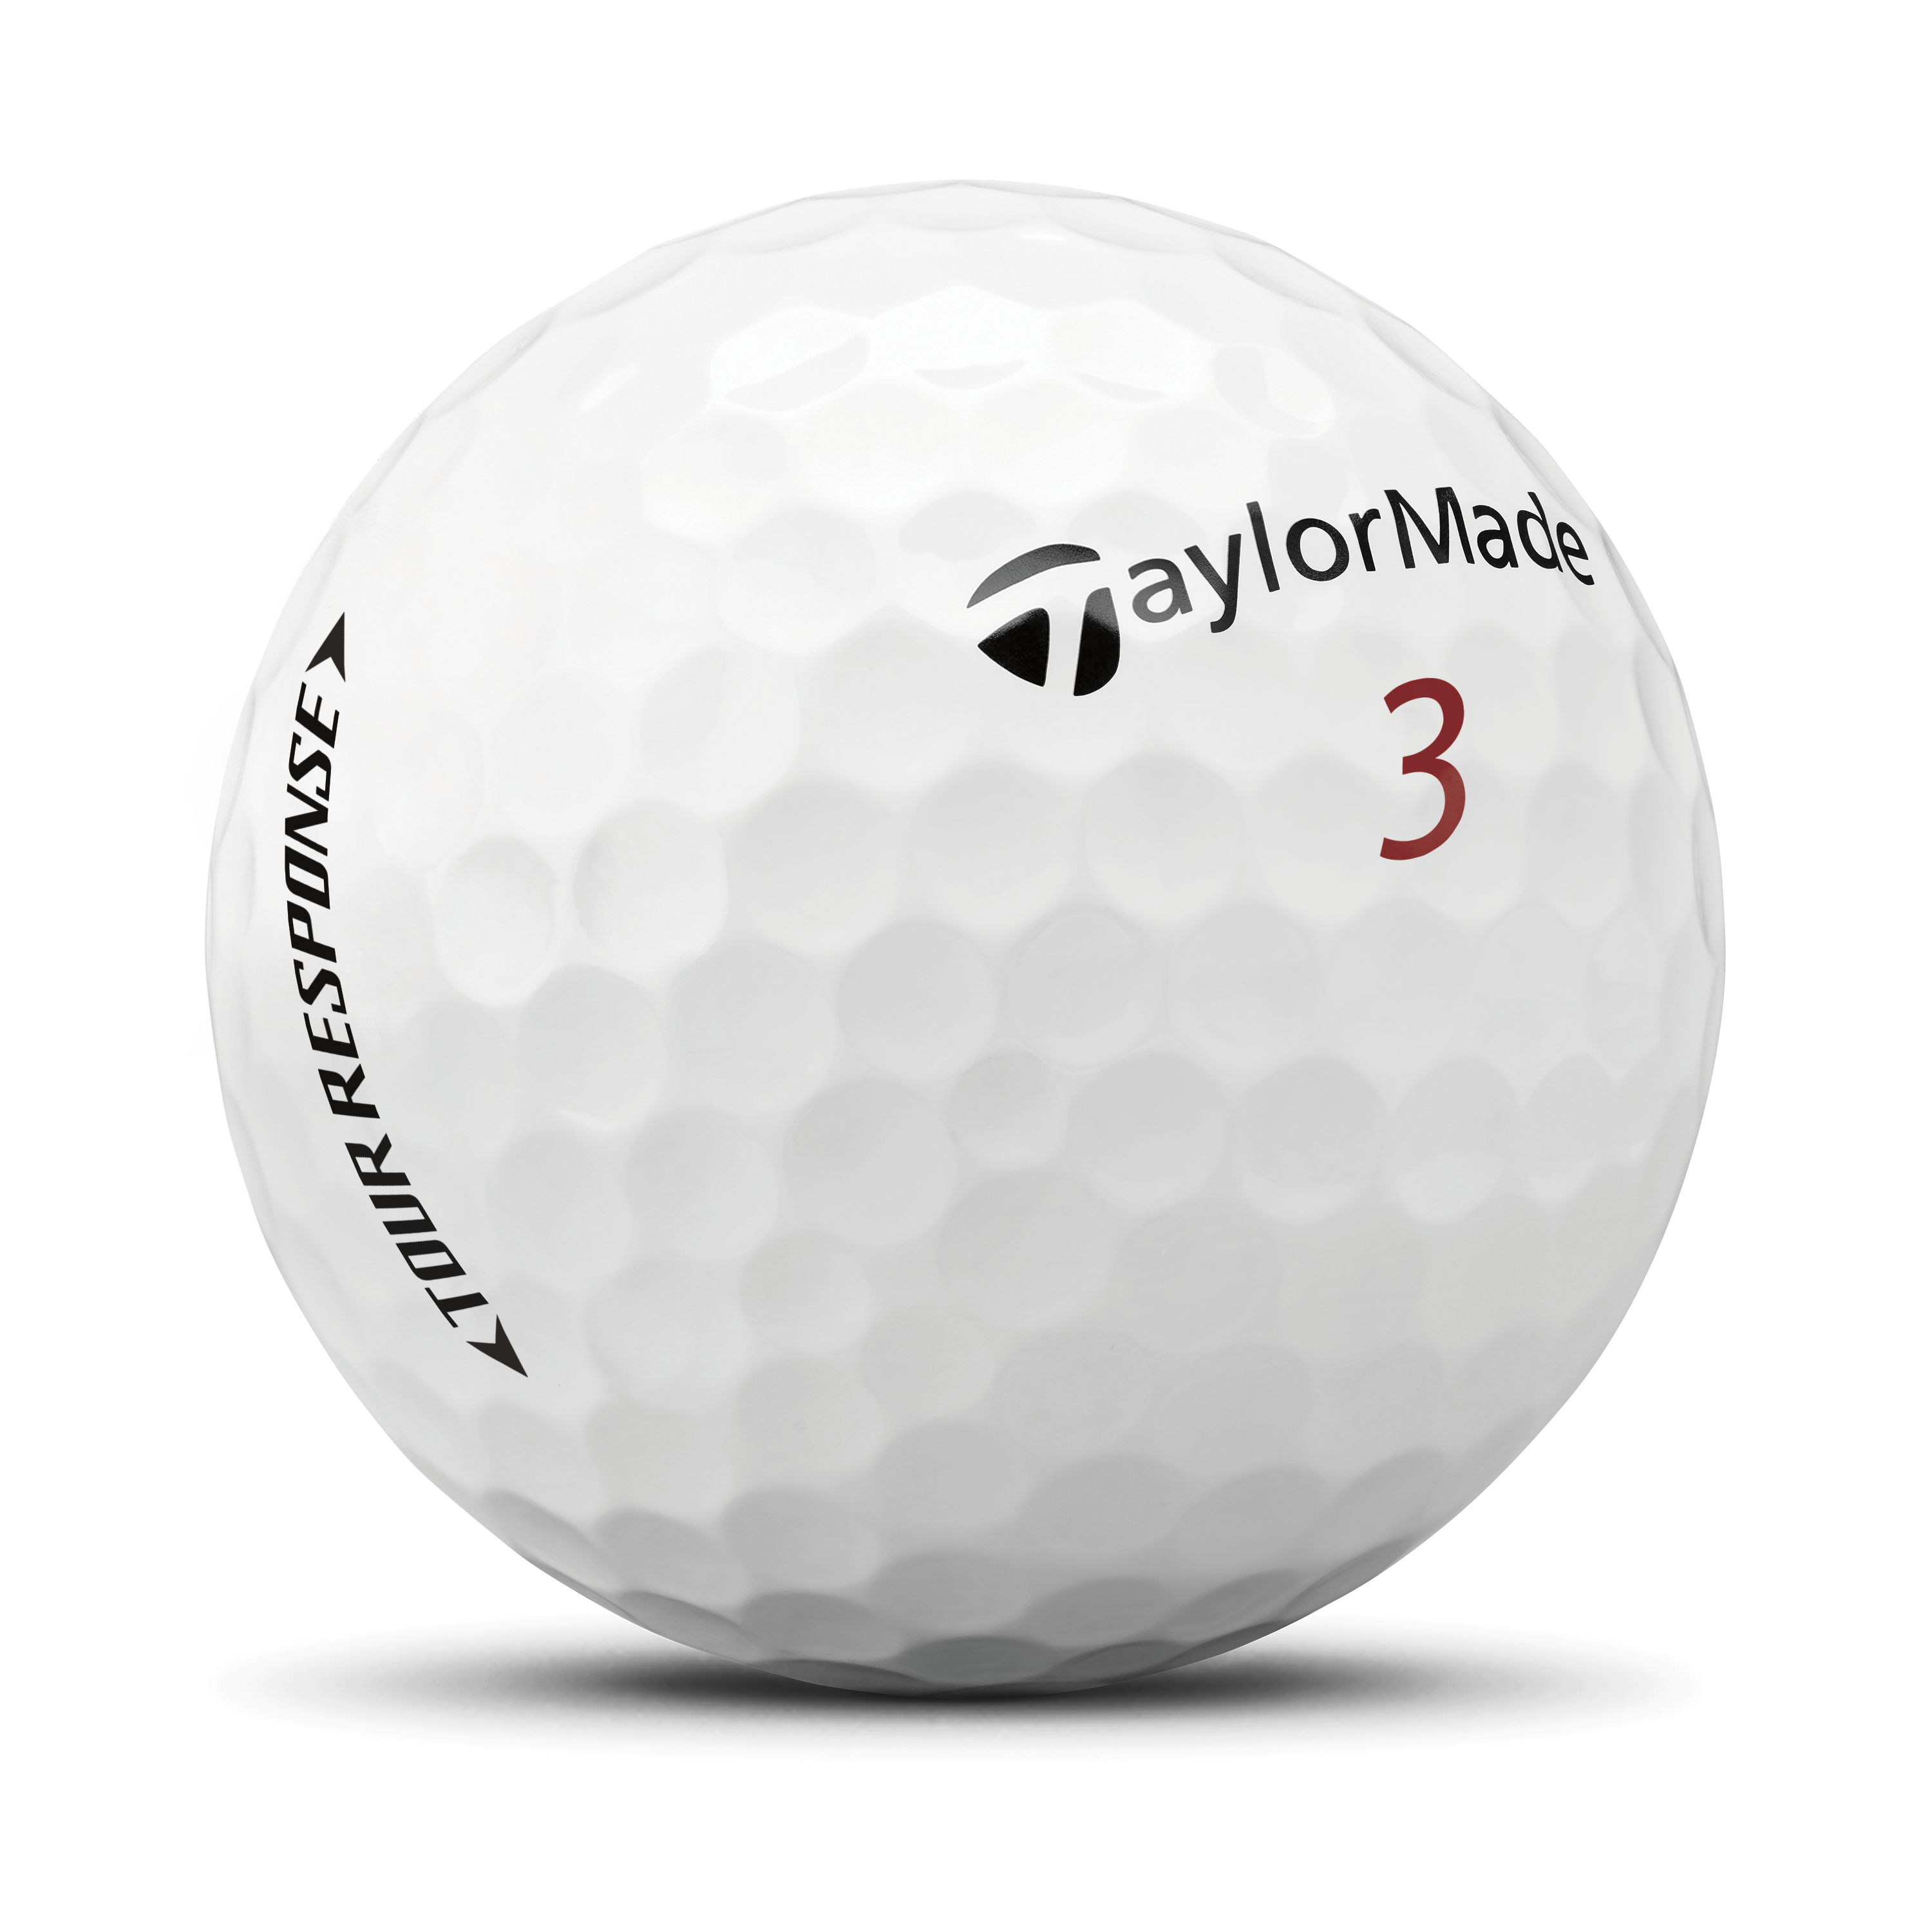 TaylorMade Tour Response and Soft Response golf balls - FIRST LOOK